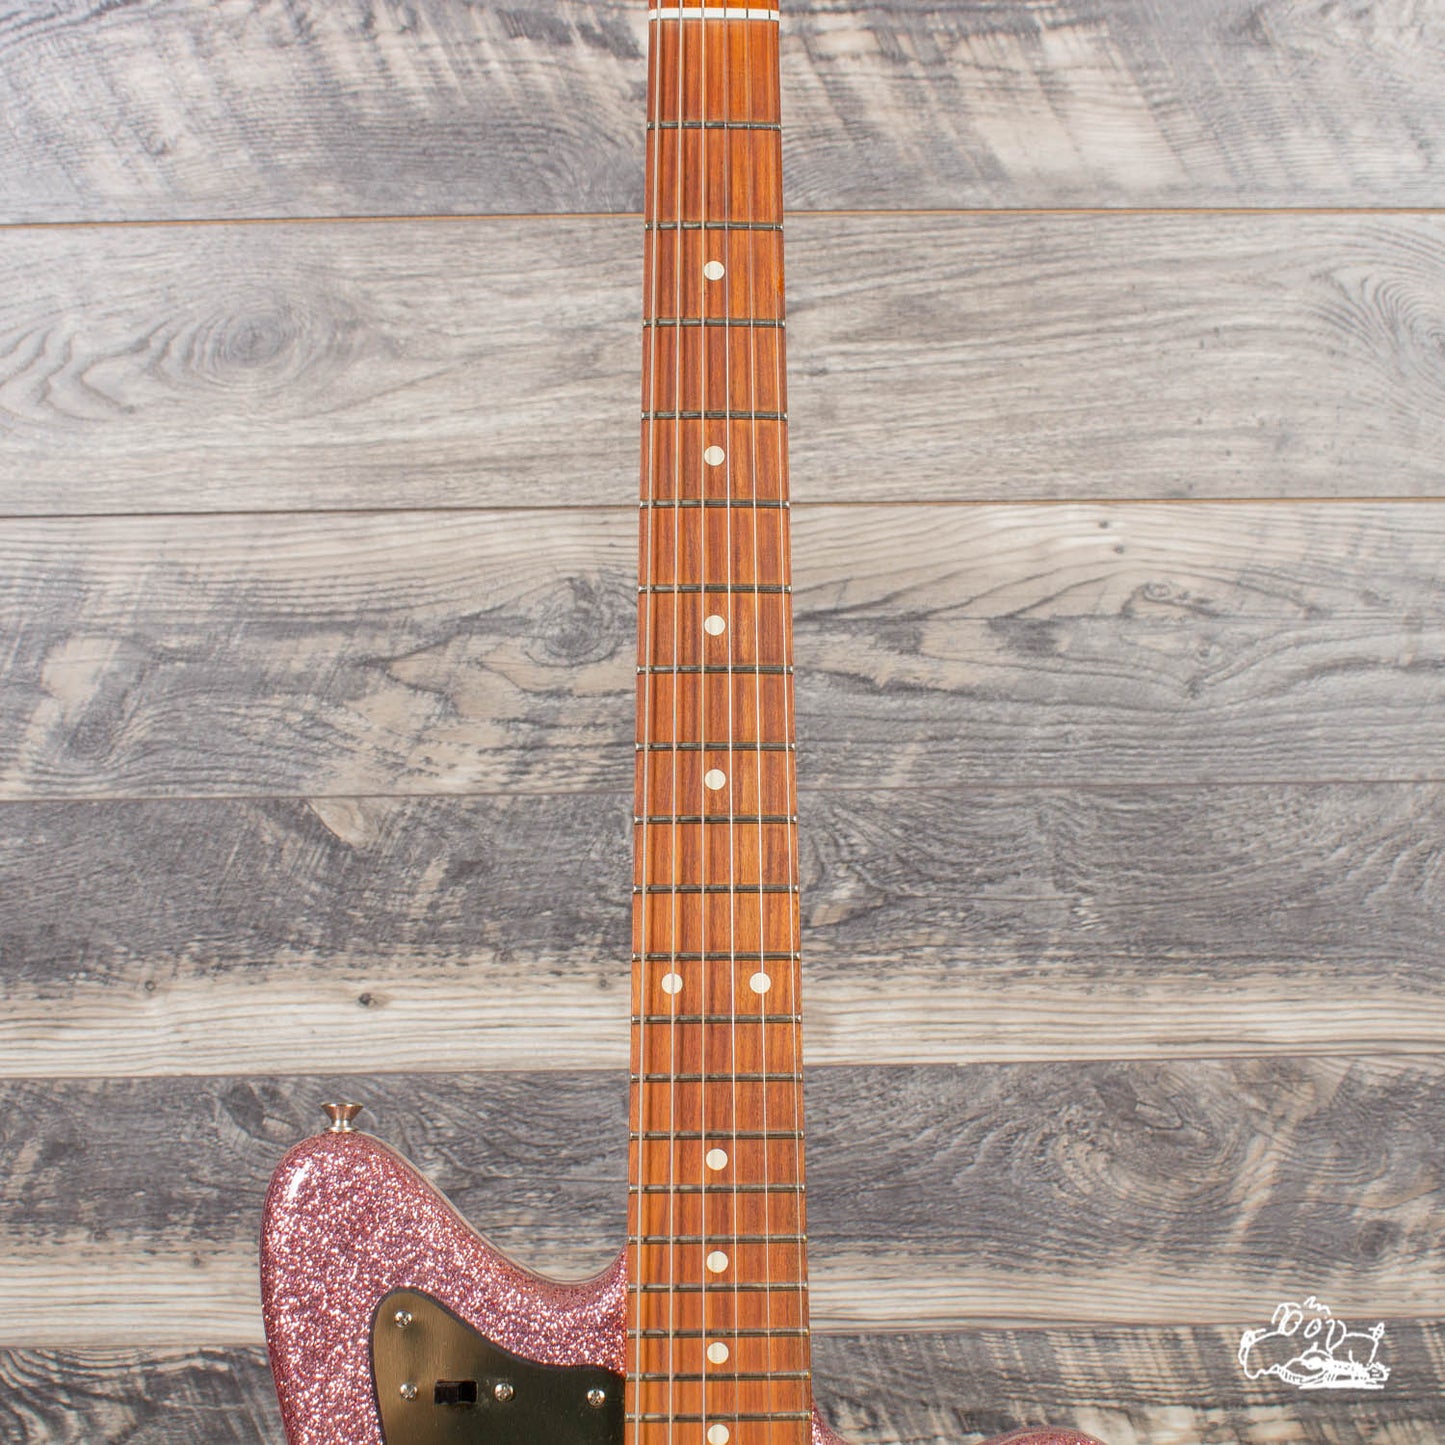 Bell & Hern Custom JazzCaster Finished in "Cousin Strawberry" Sparkle